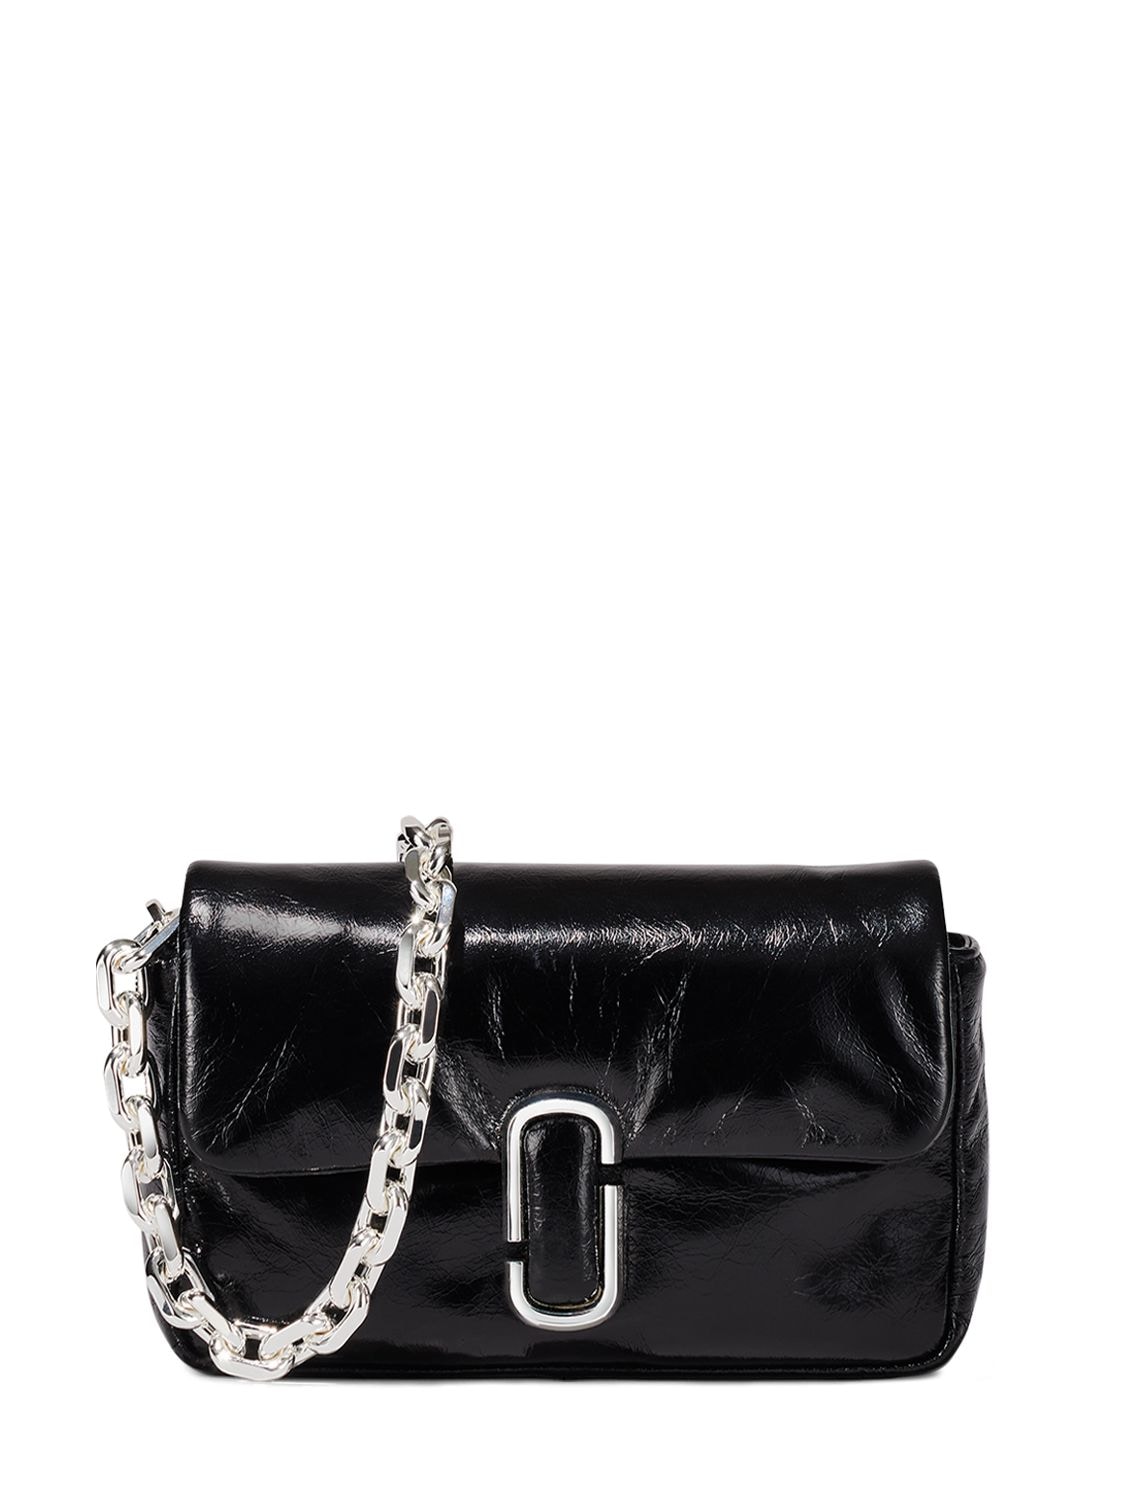 Image of The Mini Pillow Leather Shoulder Bag